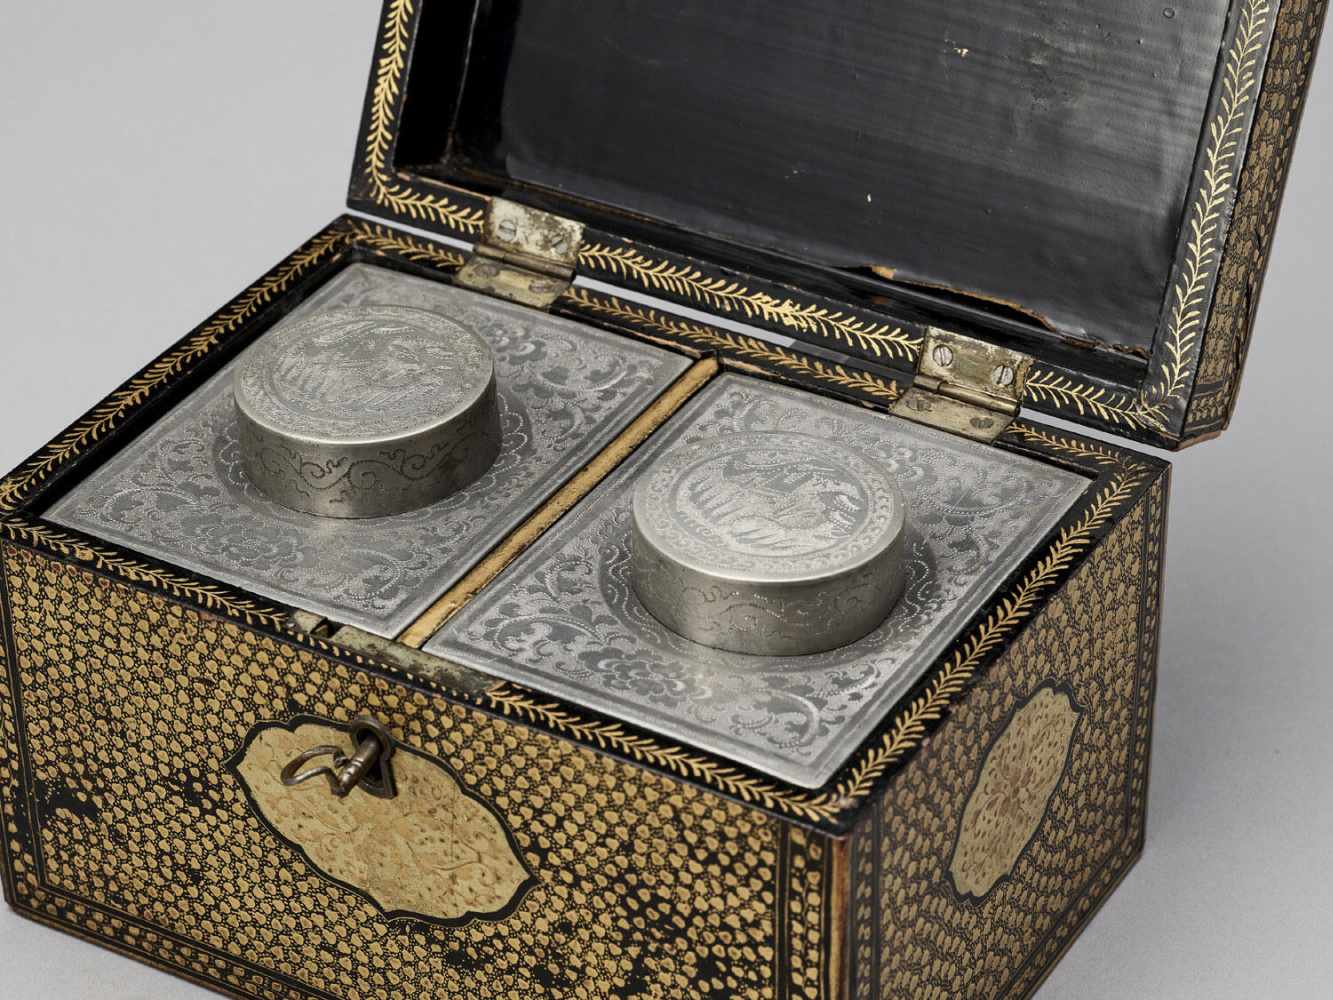 A CANTON LACQUER TEA CADDY WITH ORIGINAL TEA CONTAINERS, QING - Image 4 of 7